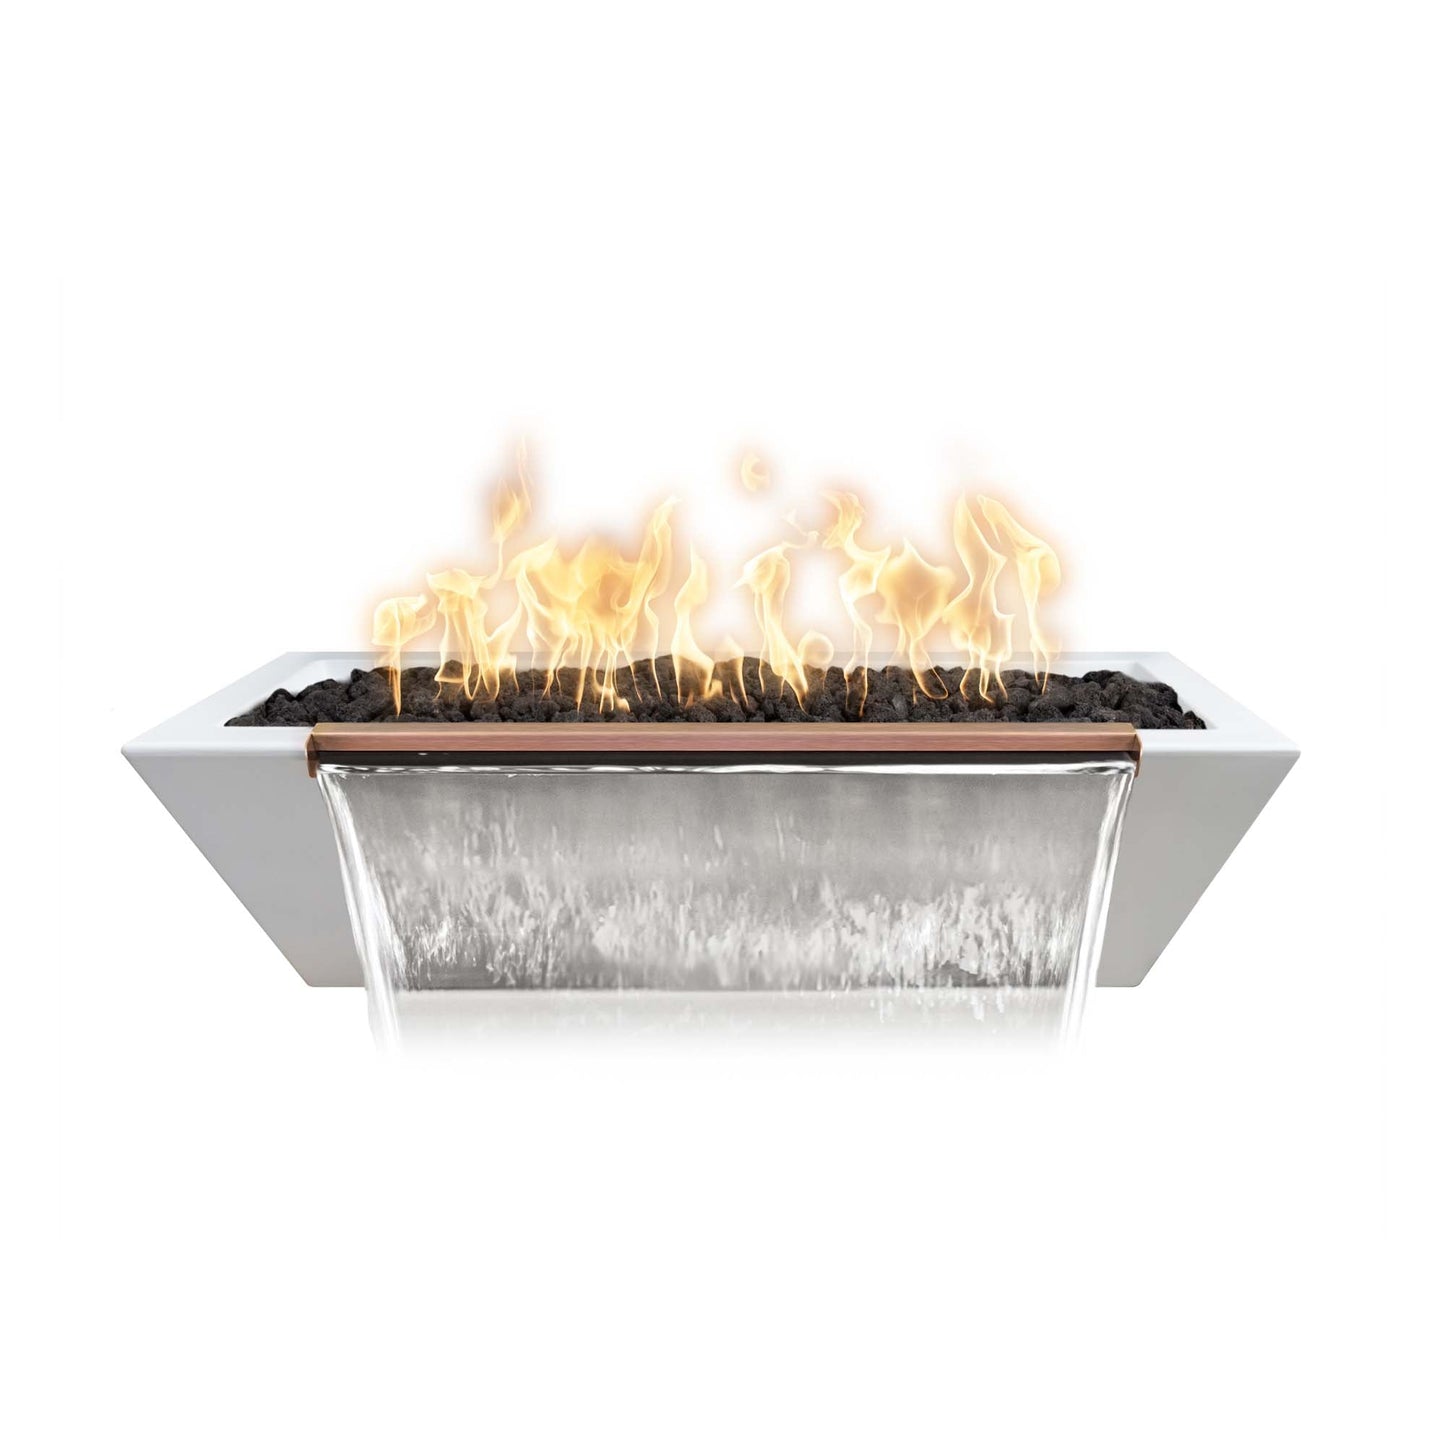 The Outdoor Plus Linear Maya 60" Gray GFRC Concrete Natural Gas Fire & Water Bowl with Match Lit with Flame Sense Ignition